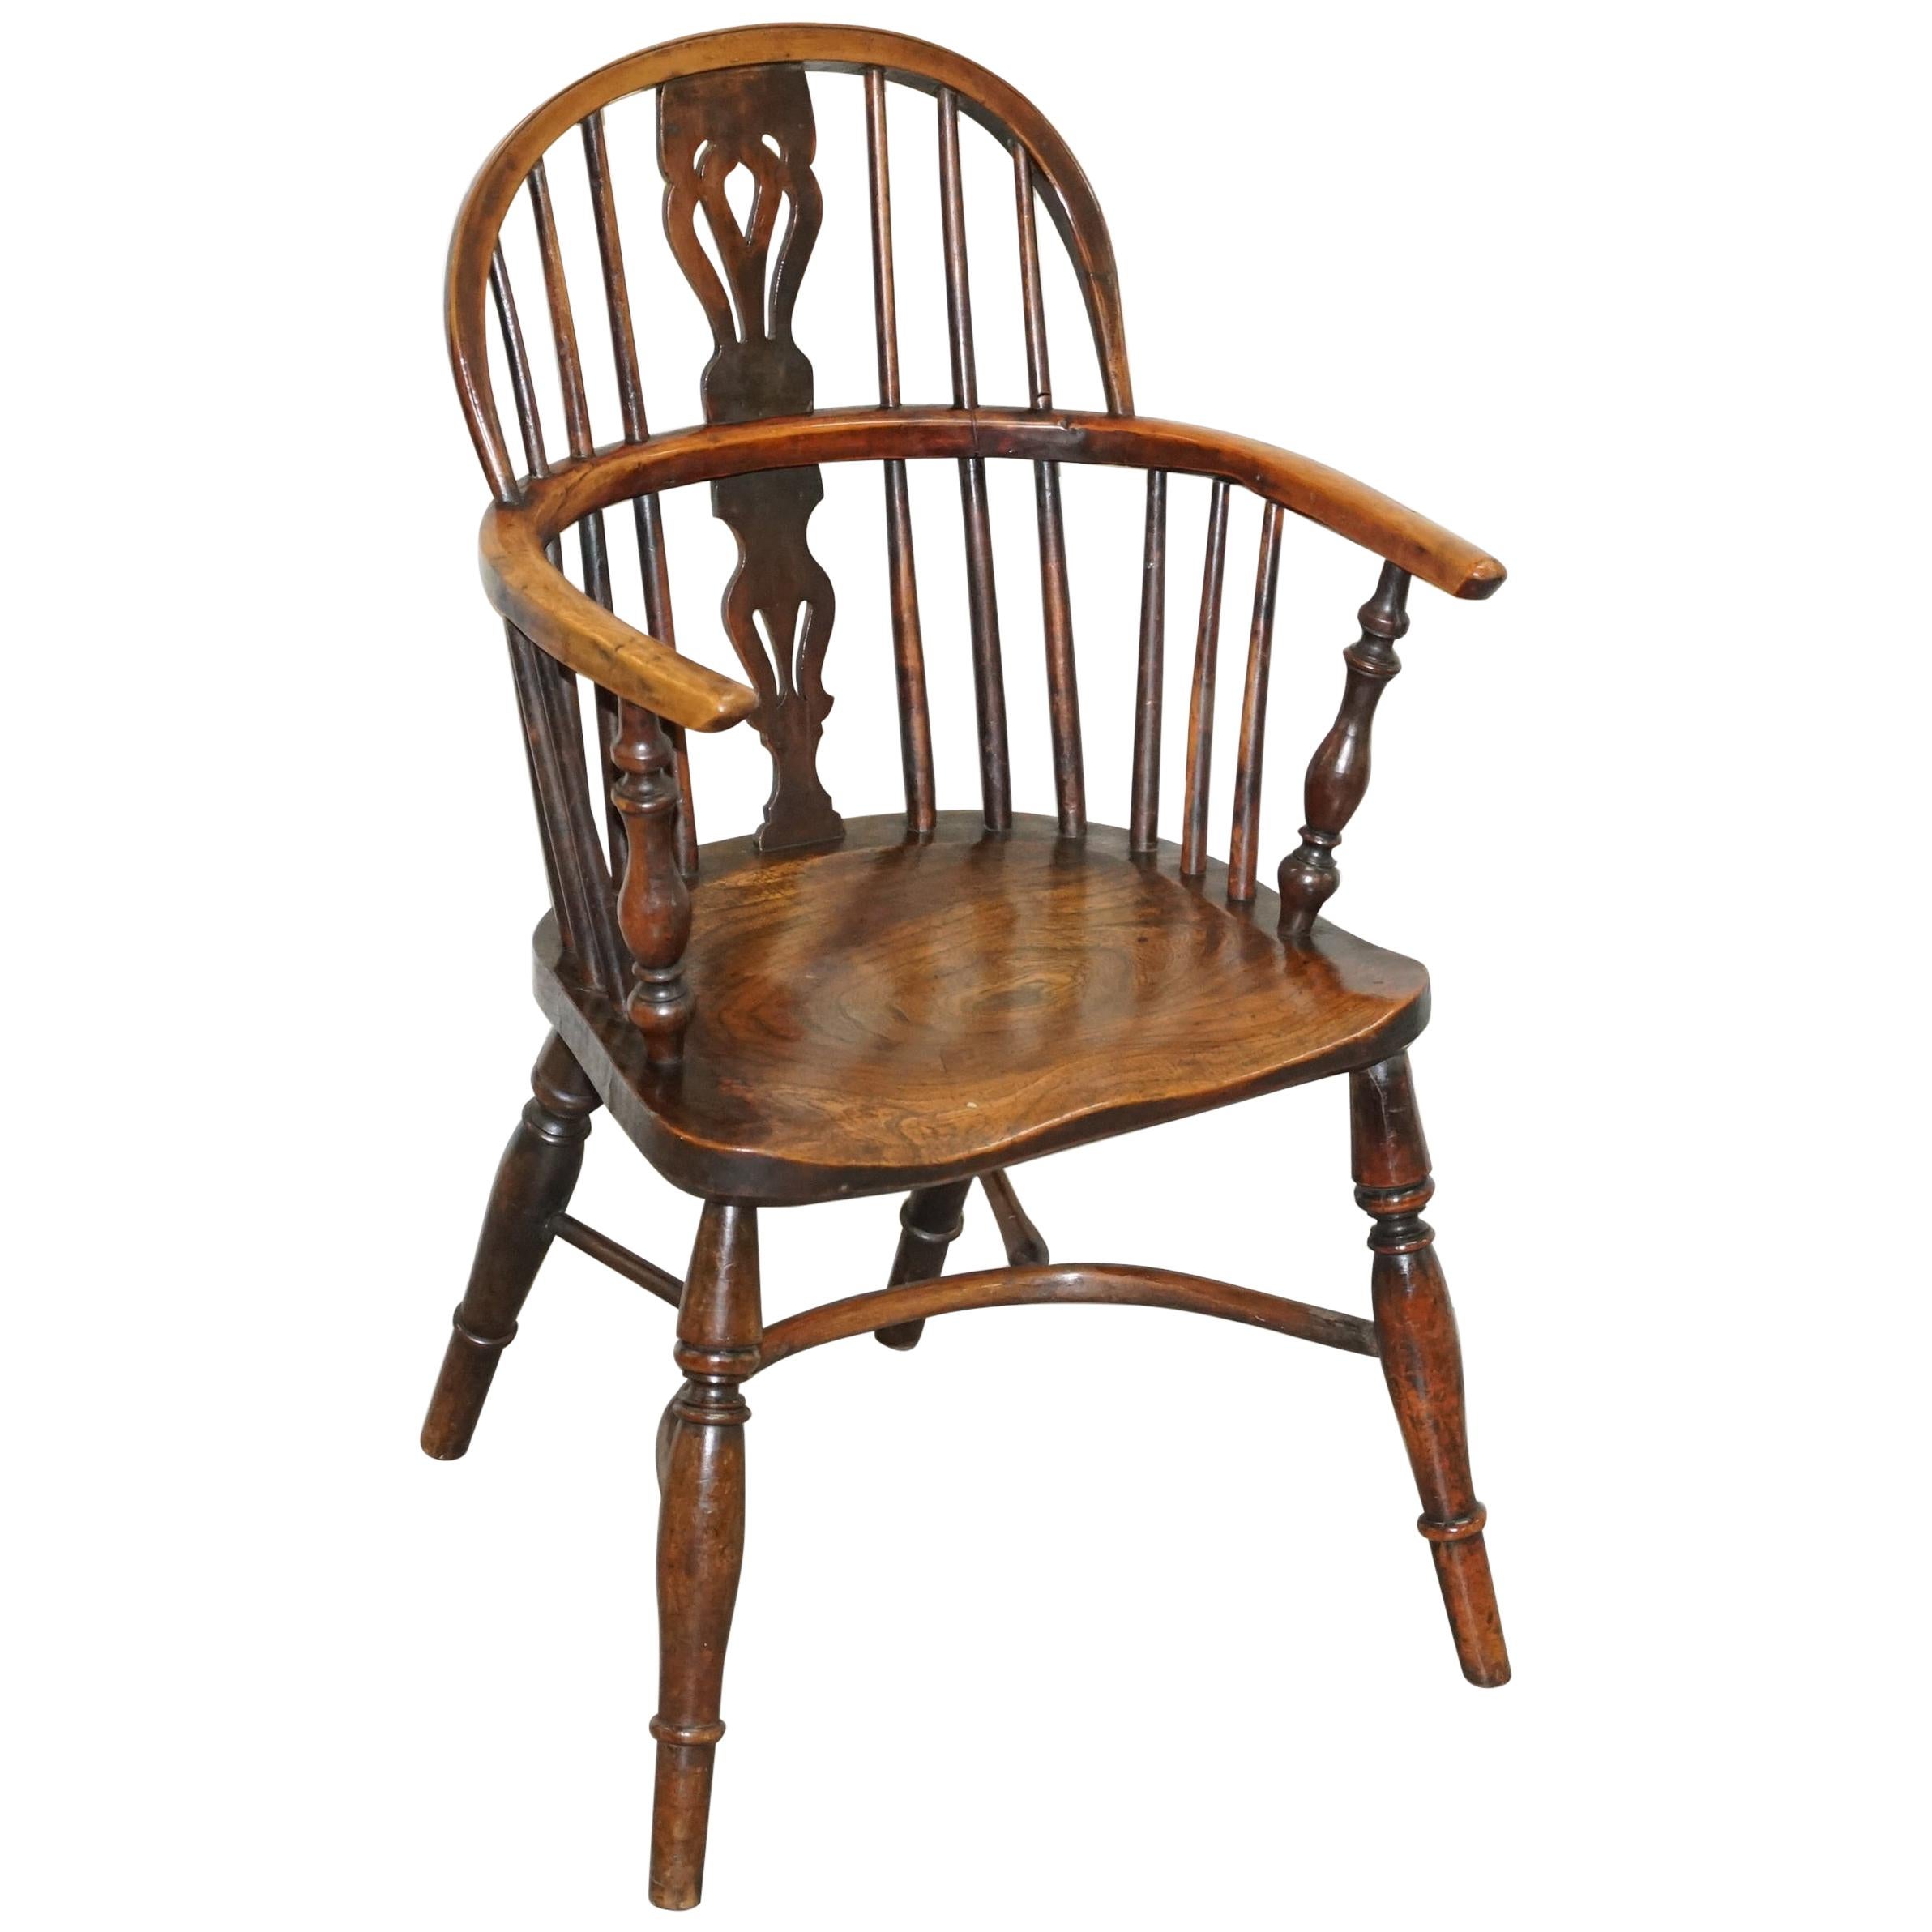 1 of 6 Solid Elm Windsor Armchairs circa 1860 English Countryhouse Furniture